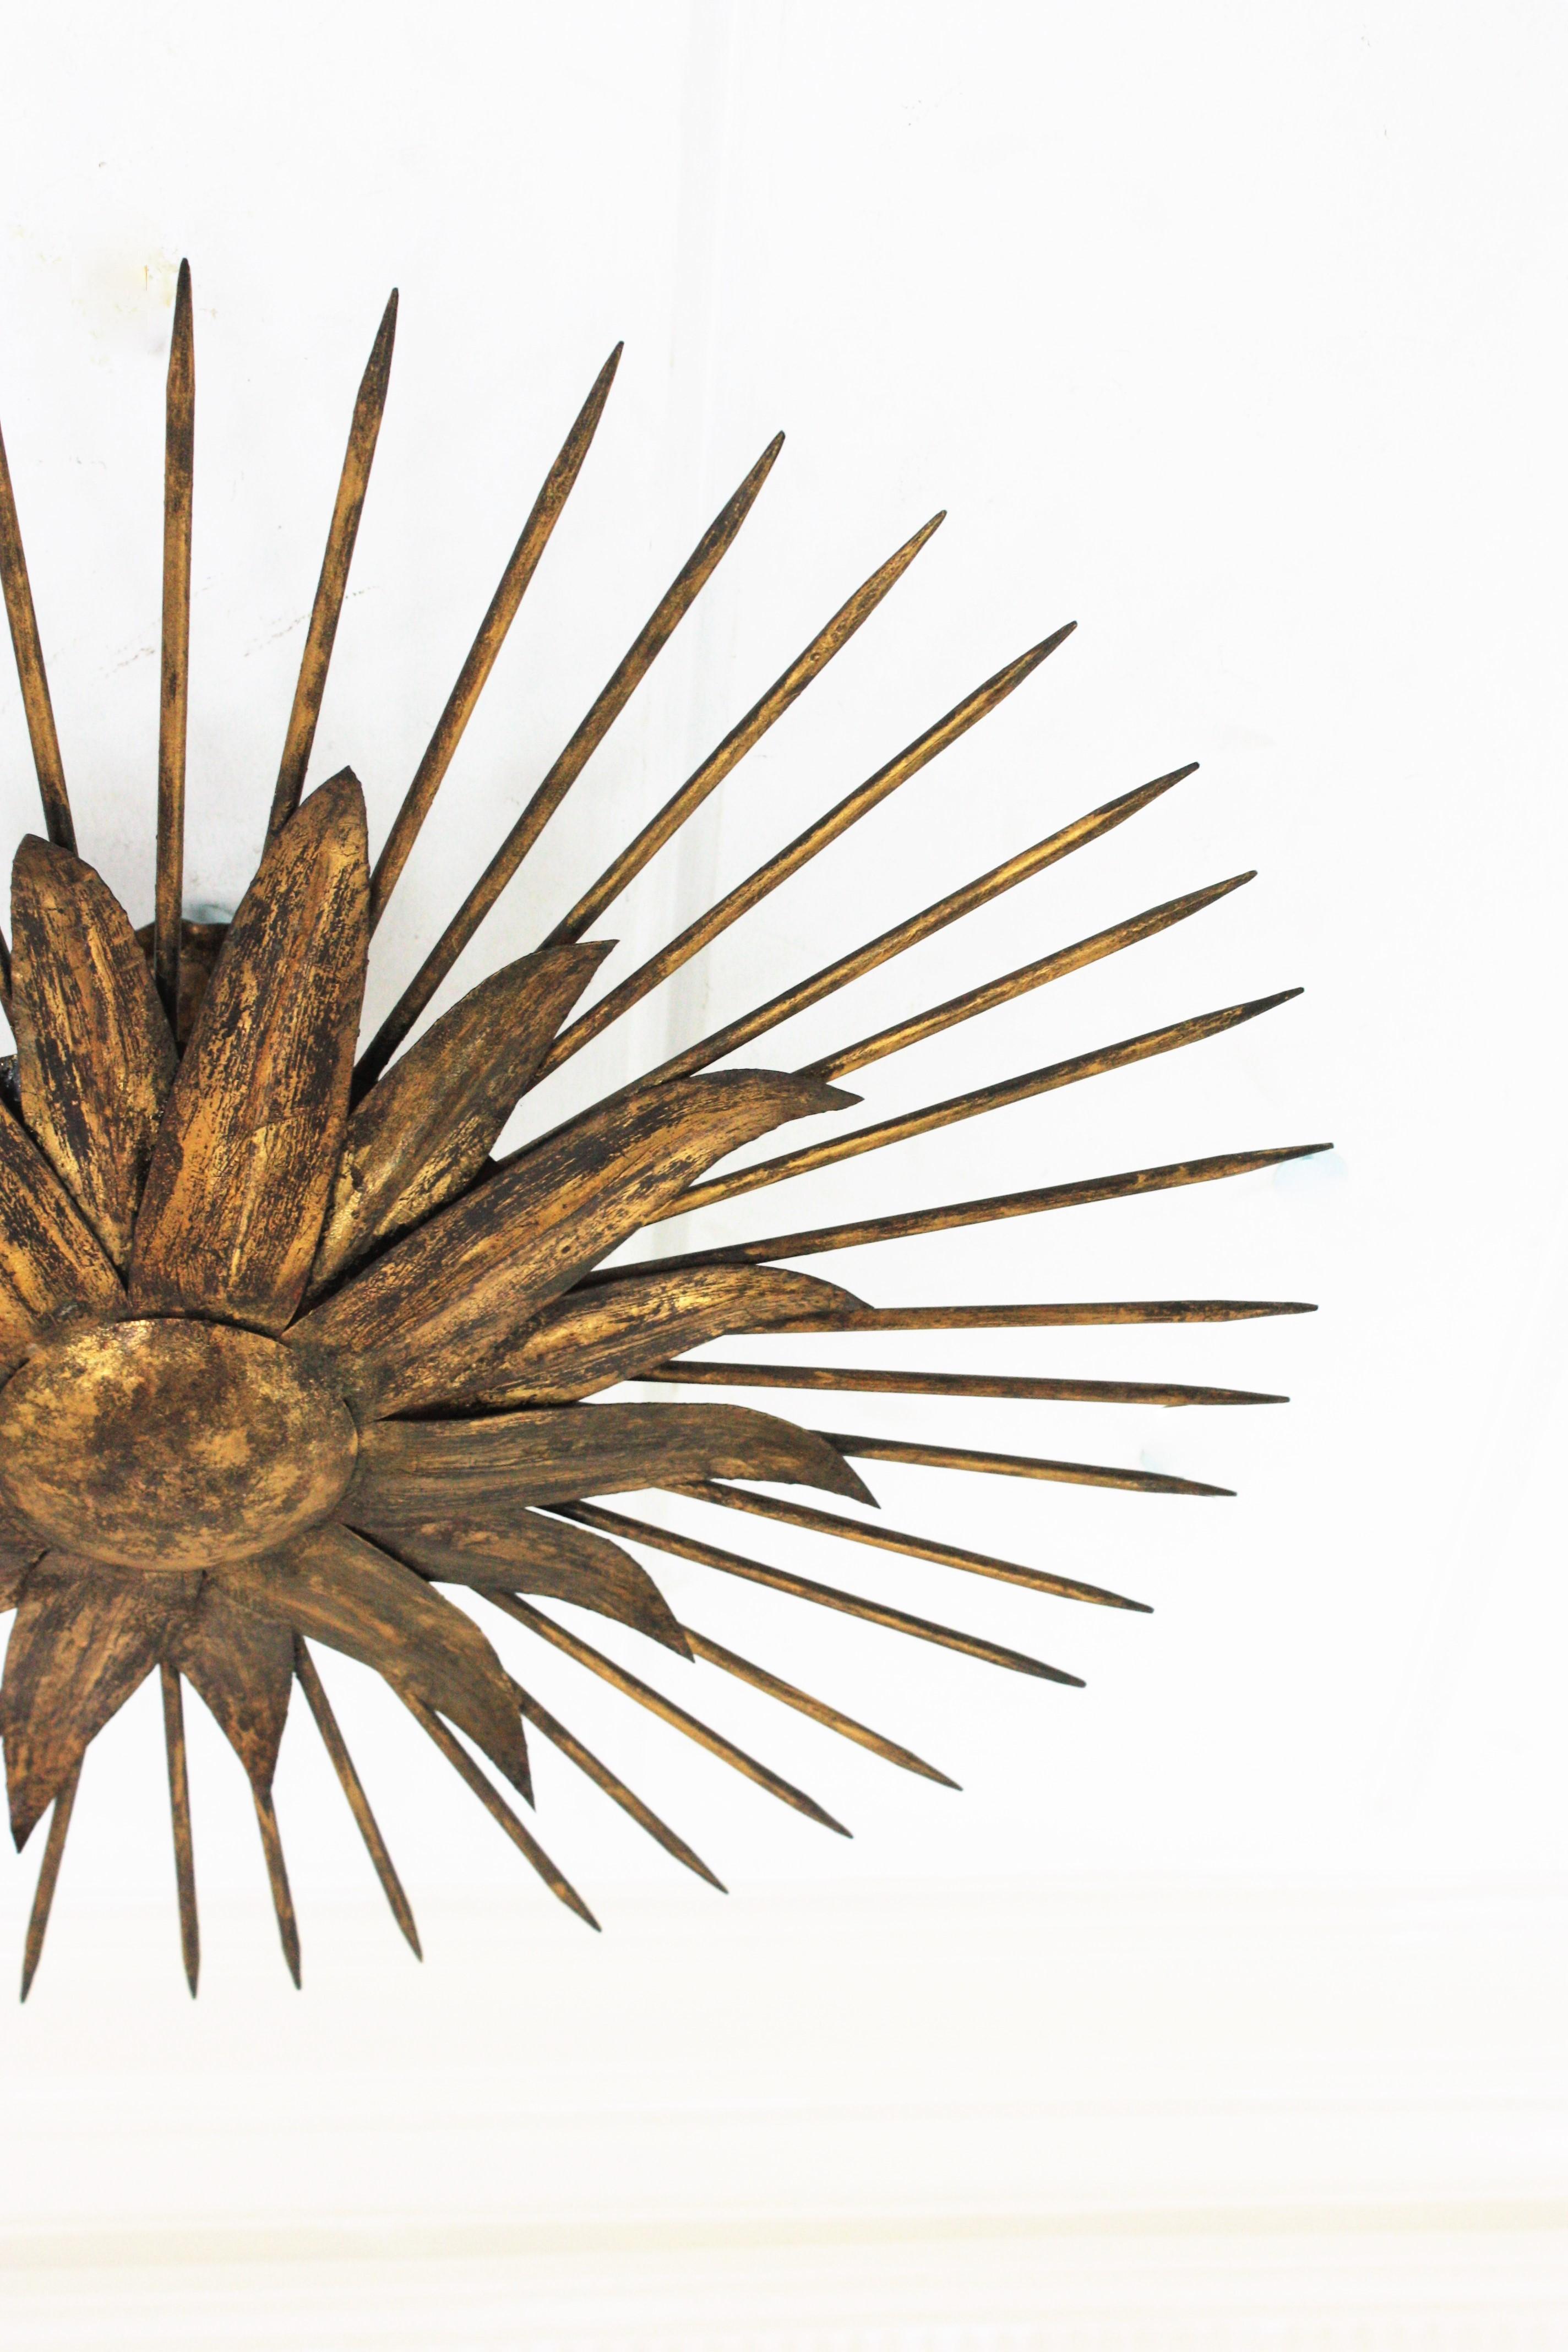 French Sunburst Light Fixture in Gilt Iron with Nail Detail, 1940s For Sale 4